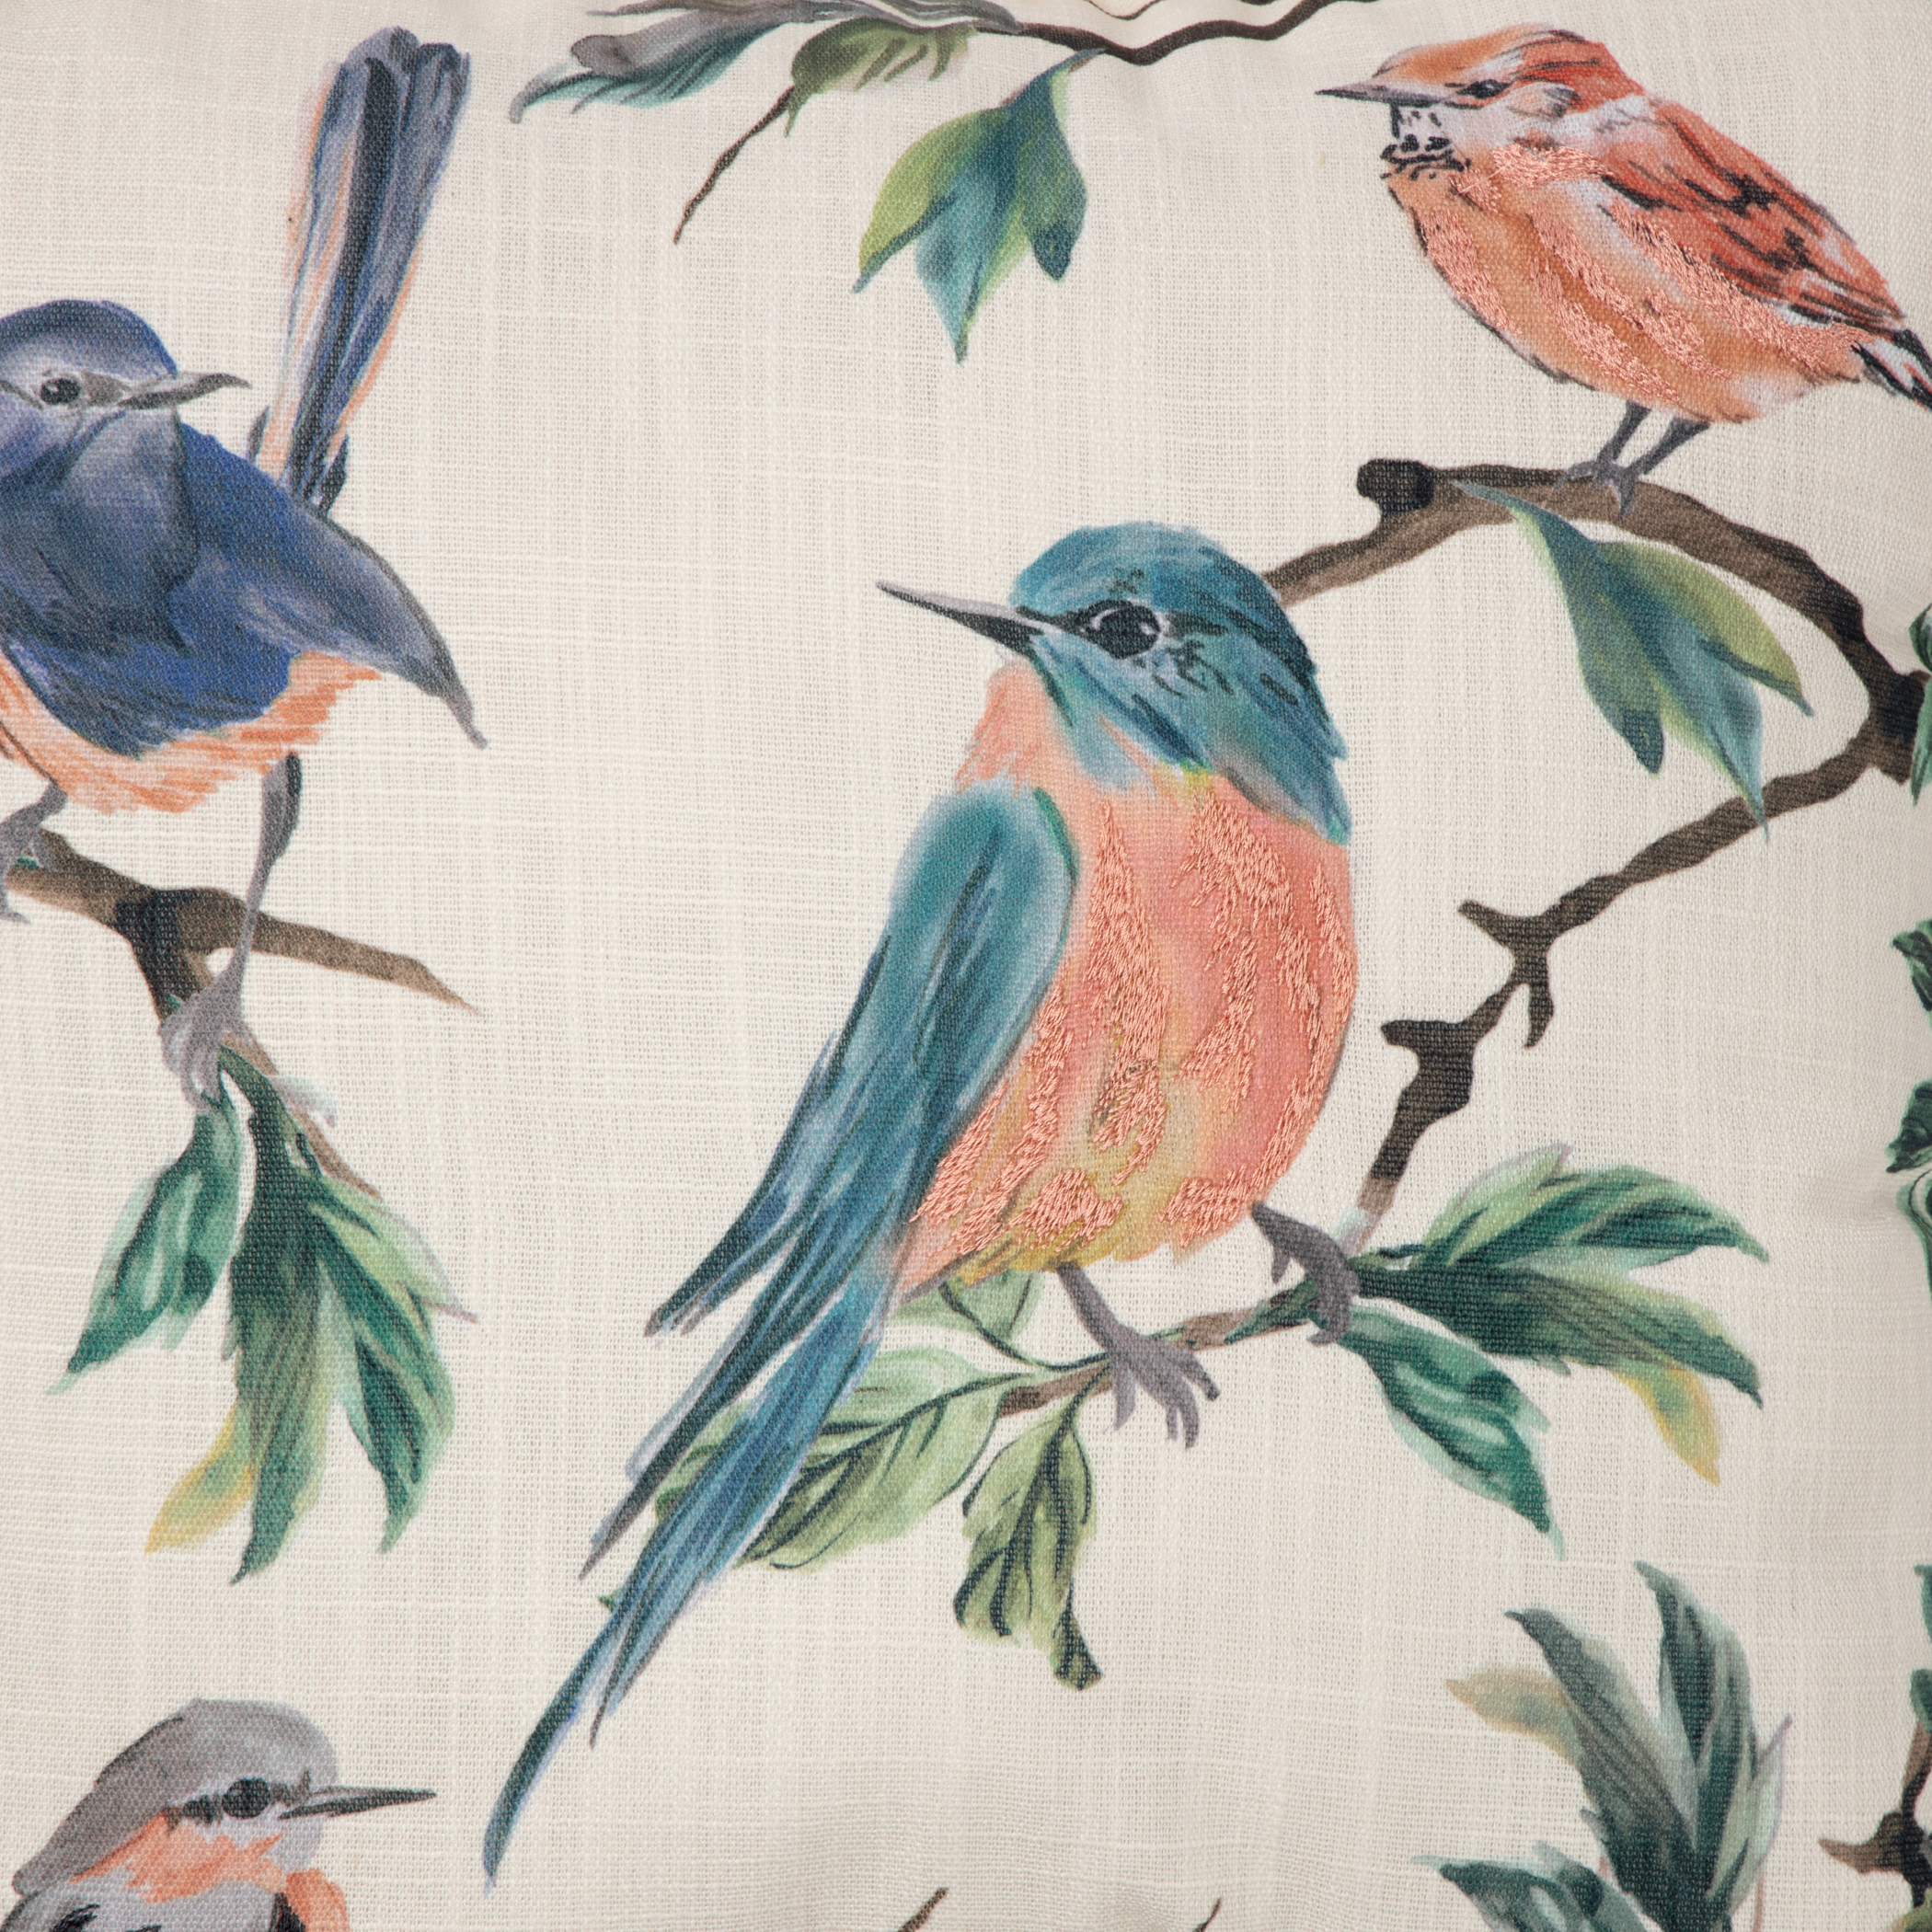 Mainstays Printed Bird Decorative Square Pillow, 18x18, Multi-Color, 1 per Pack - image 5 of 5